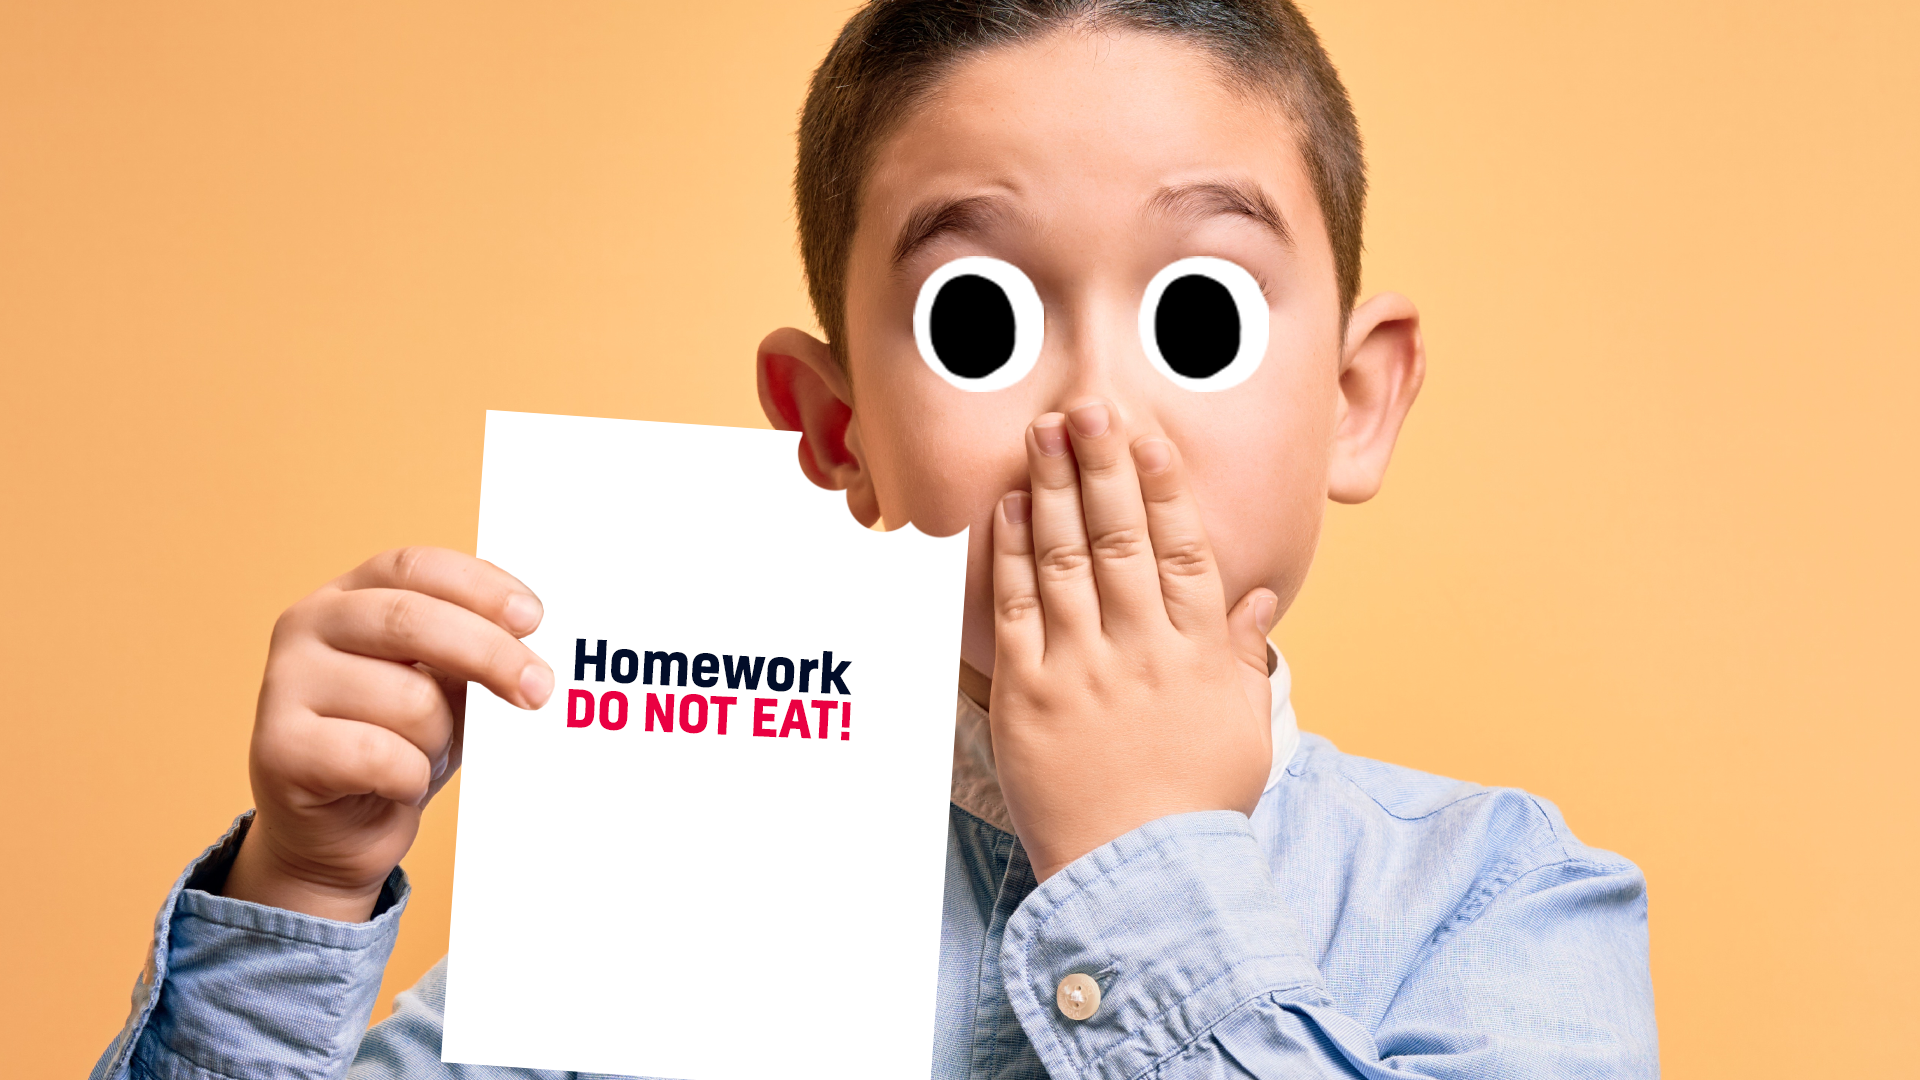 why did the boy eat his homework